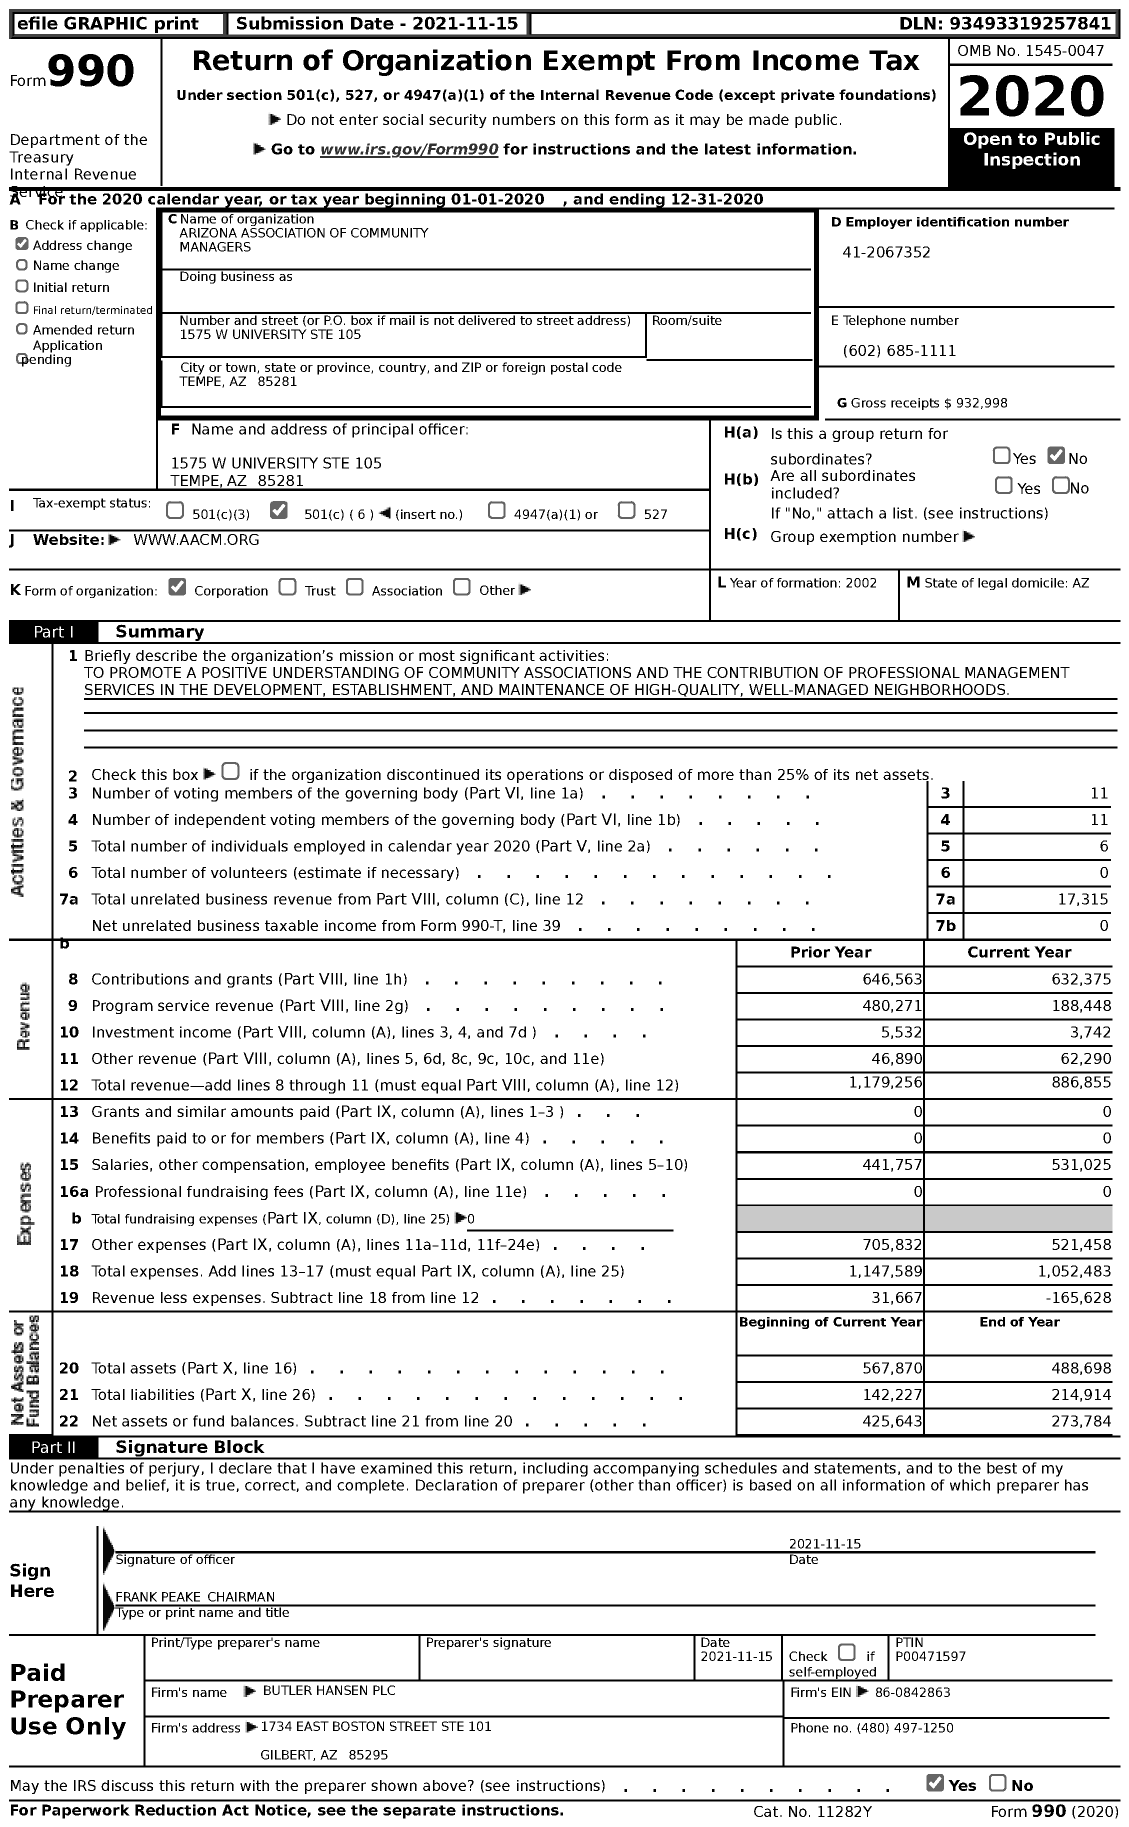 Image of first page of 2020 Form 990 for Arizona Association of Community Managers (AACM)